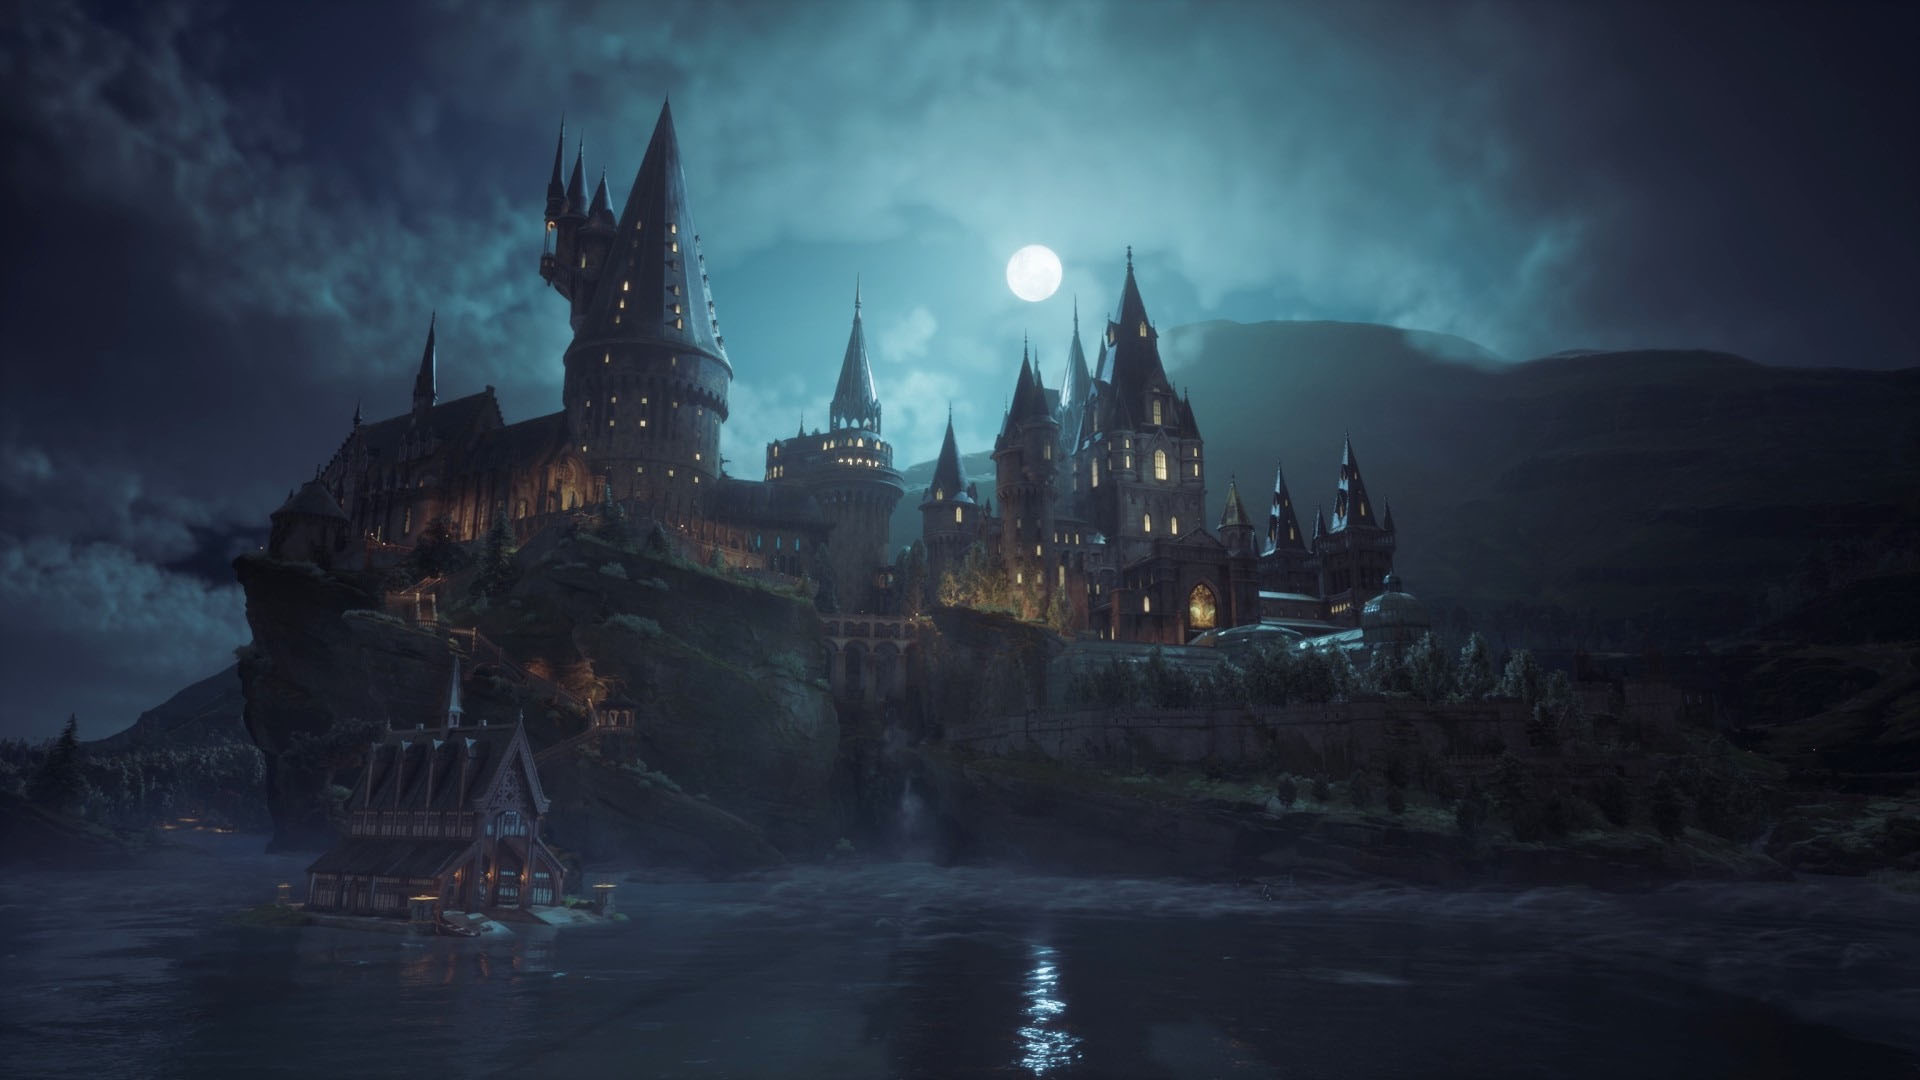 Hogwarts Legacy Makes Up the Top Four Sellers on Steam Last Week